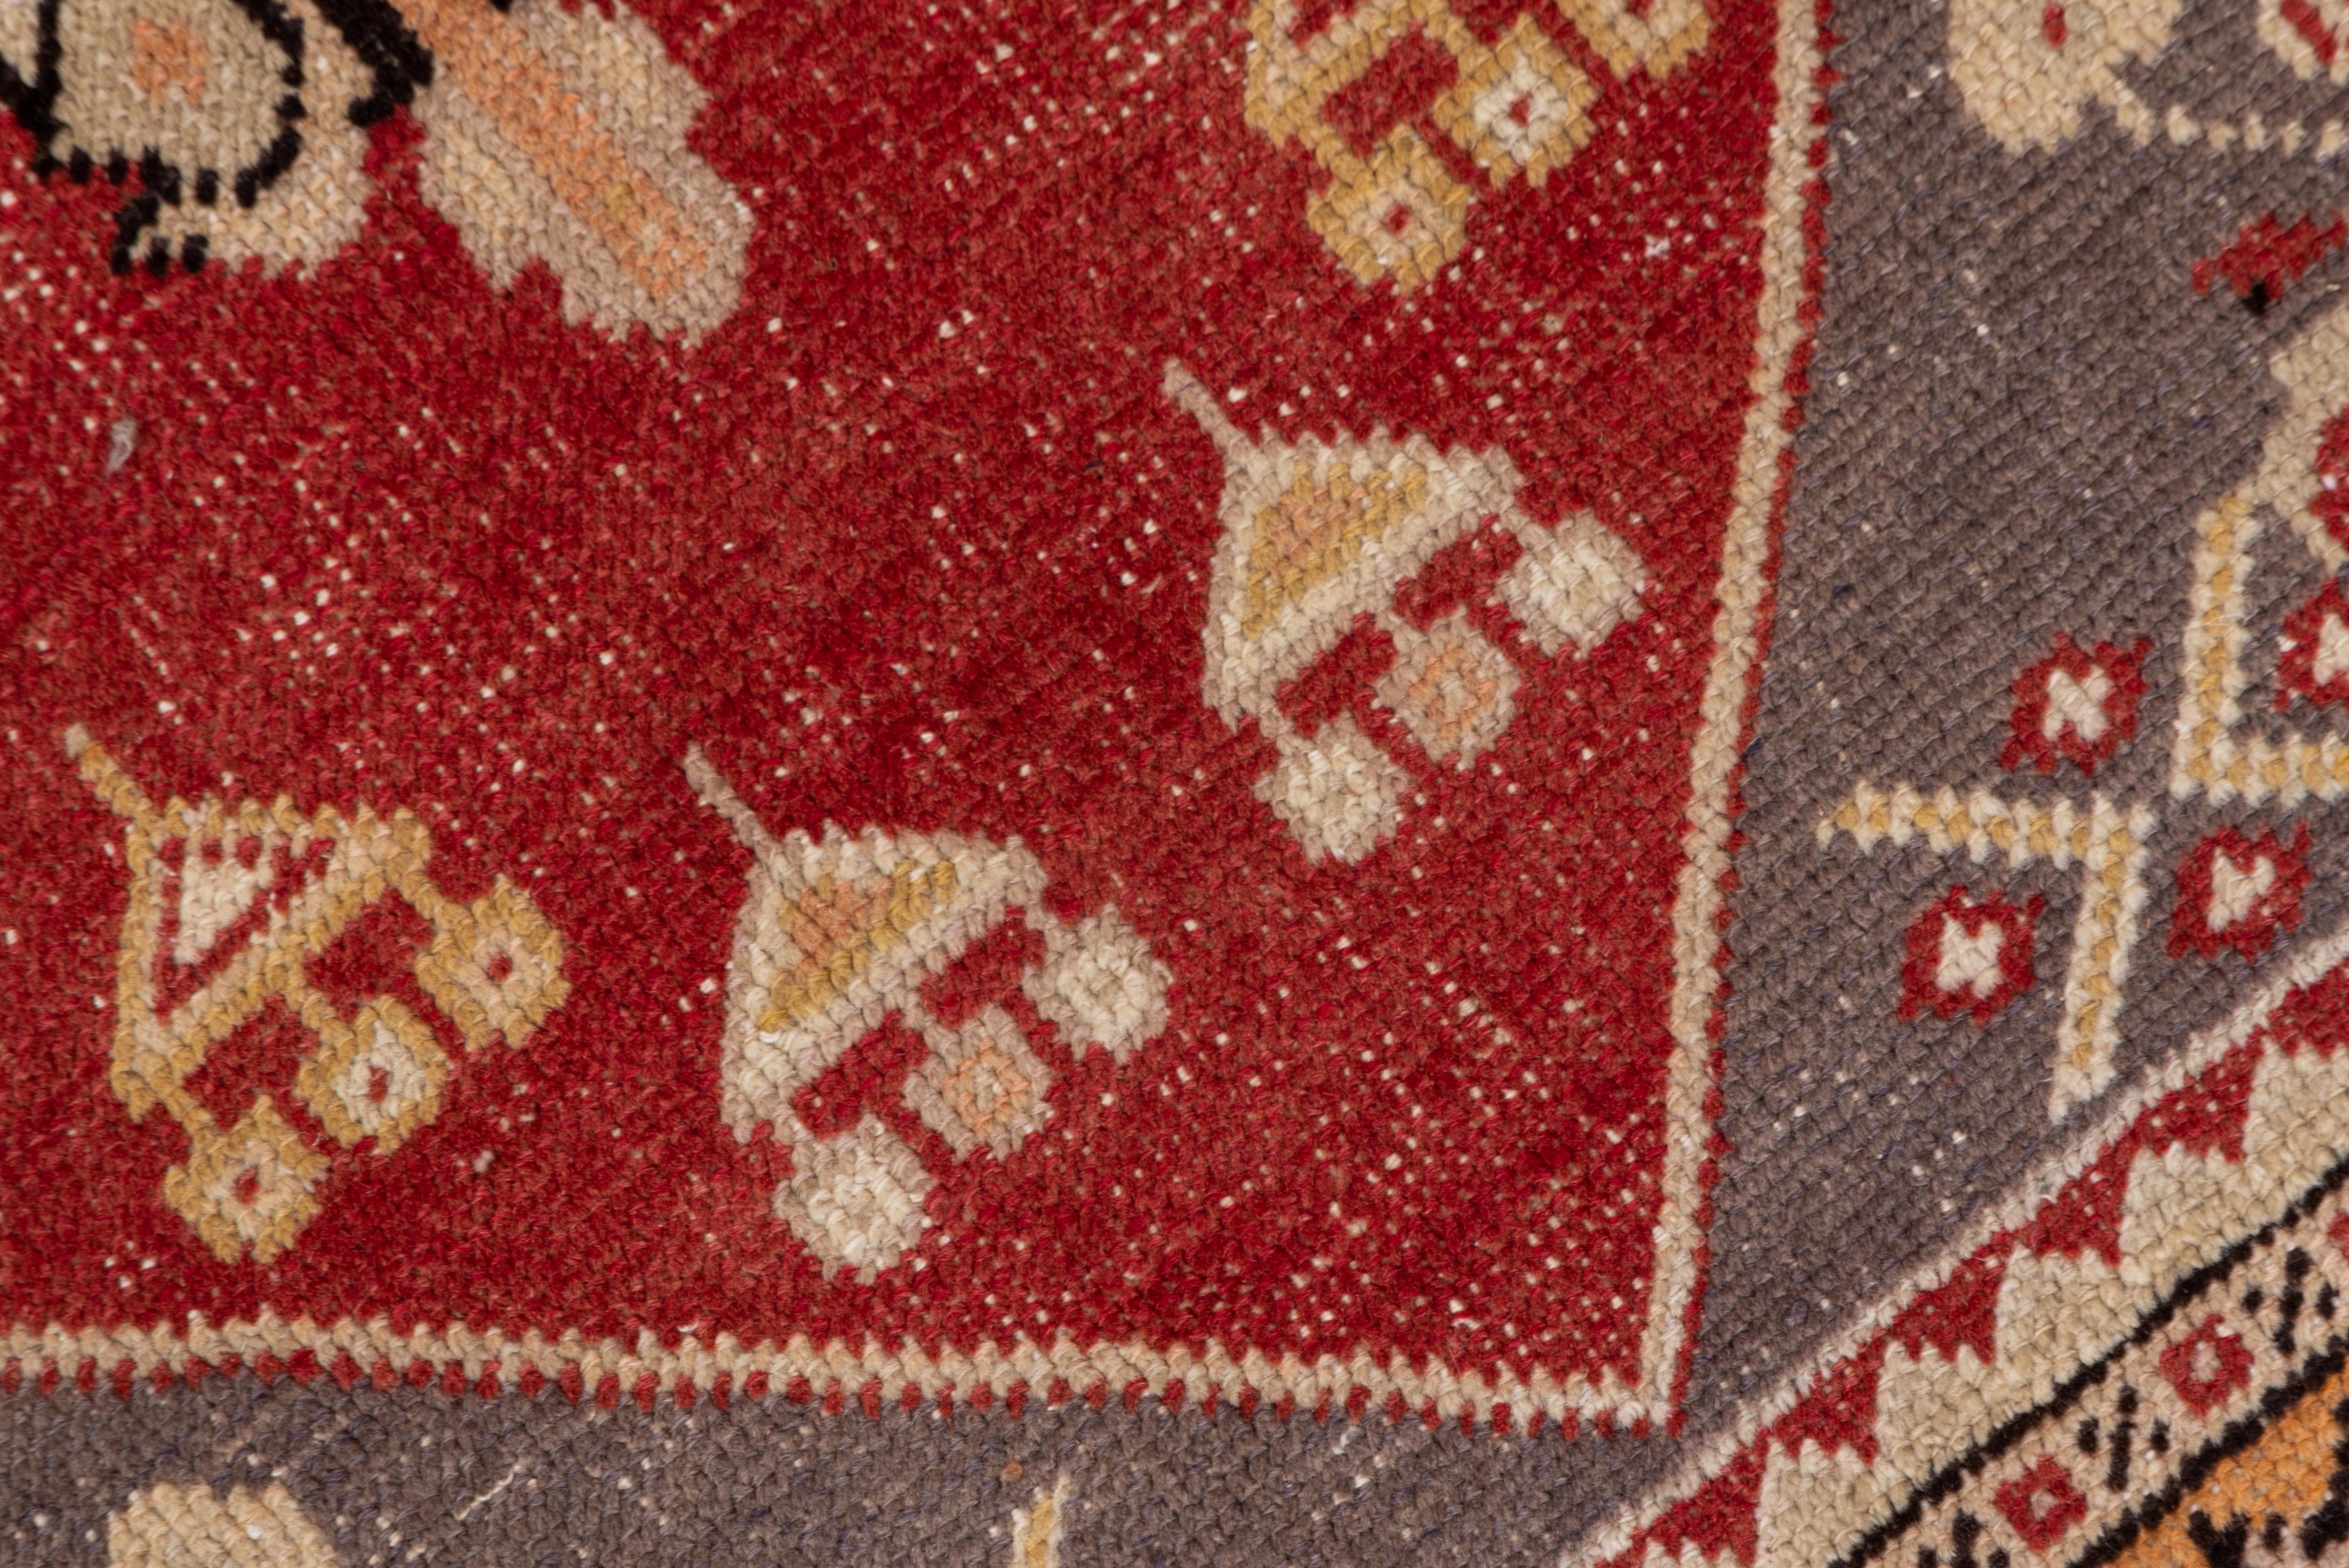 The red field displays a large cream palmette pendant medallion with dark brown, red and orange-brown accents, with triangular jewels suspended at both fields ends. There are green spandrels and a mustard main border with a star pattern.